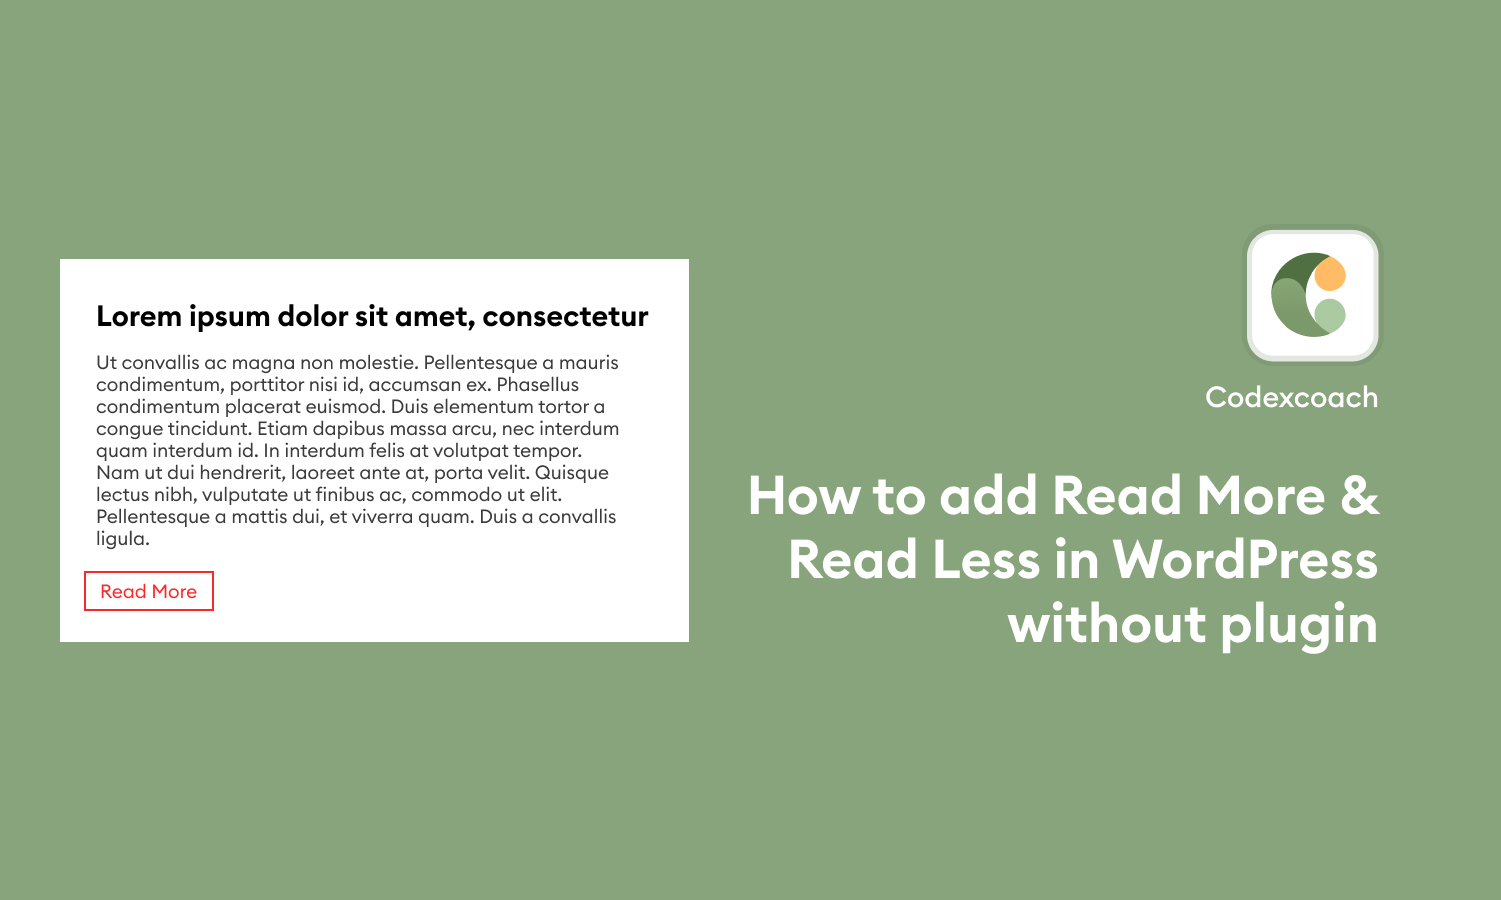 How to add Read More & Read Less in WordPress without plugin